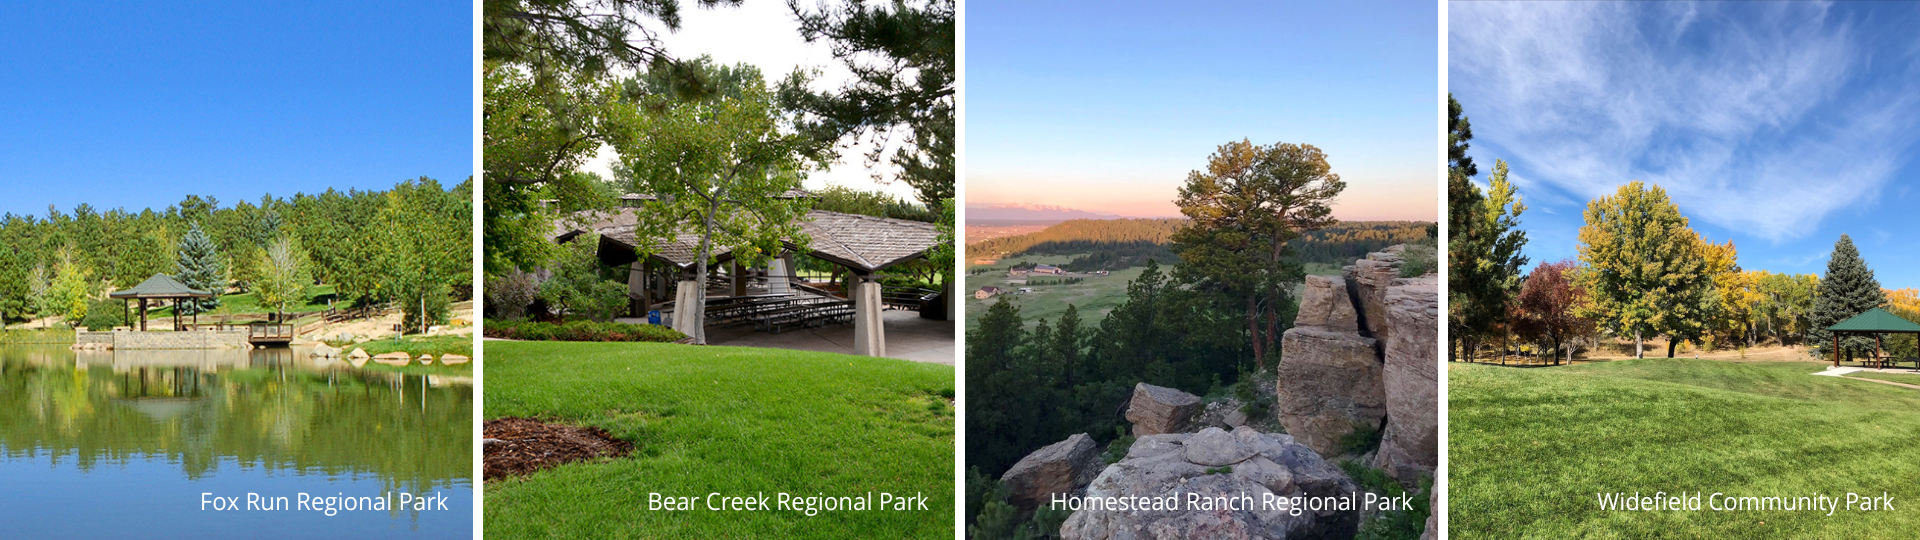 an image of four pictures of four different El Paso County Parks. From Left to right: Fox Run Regional Park, Bear Creek Regional Park, Homestead Ranch Regional Park, and Widefield Community Park